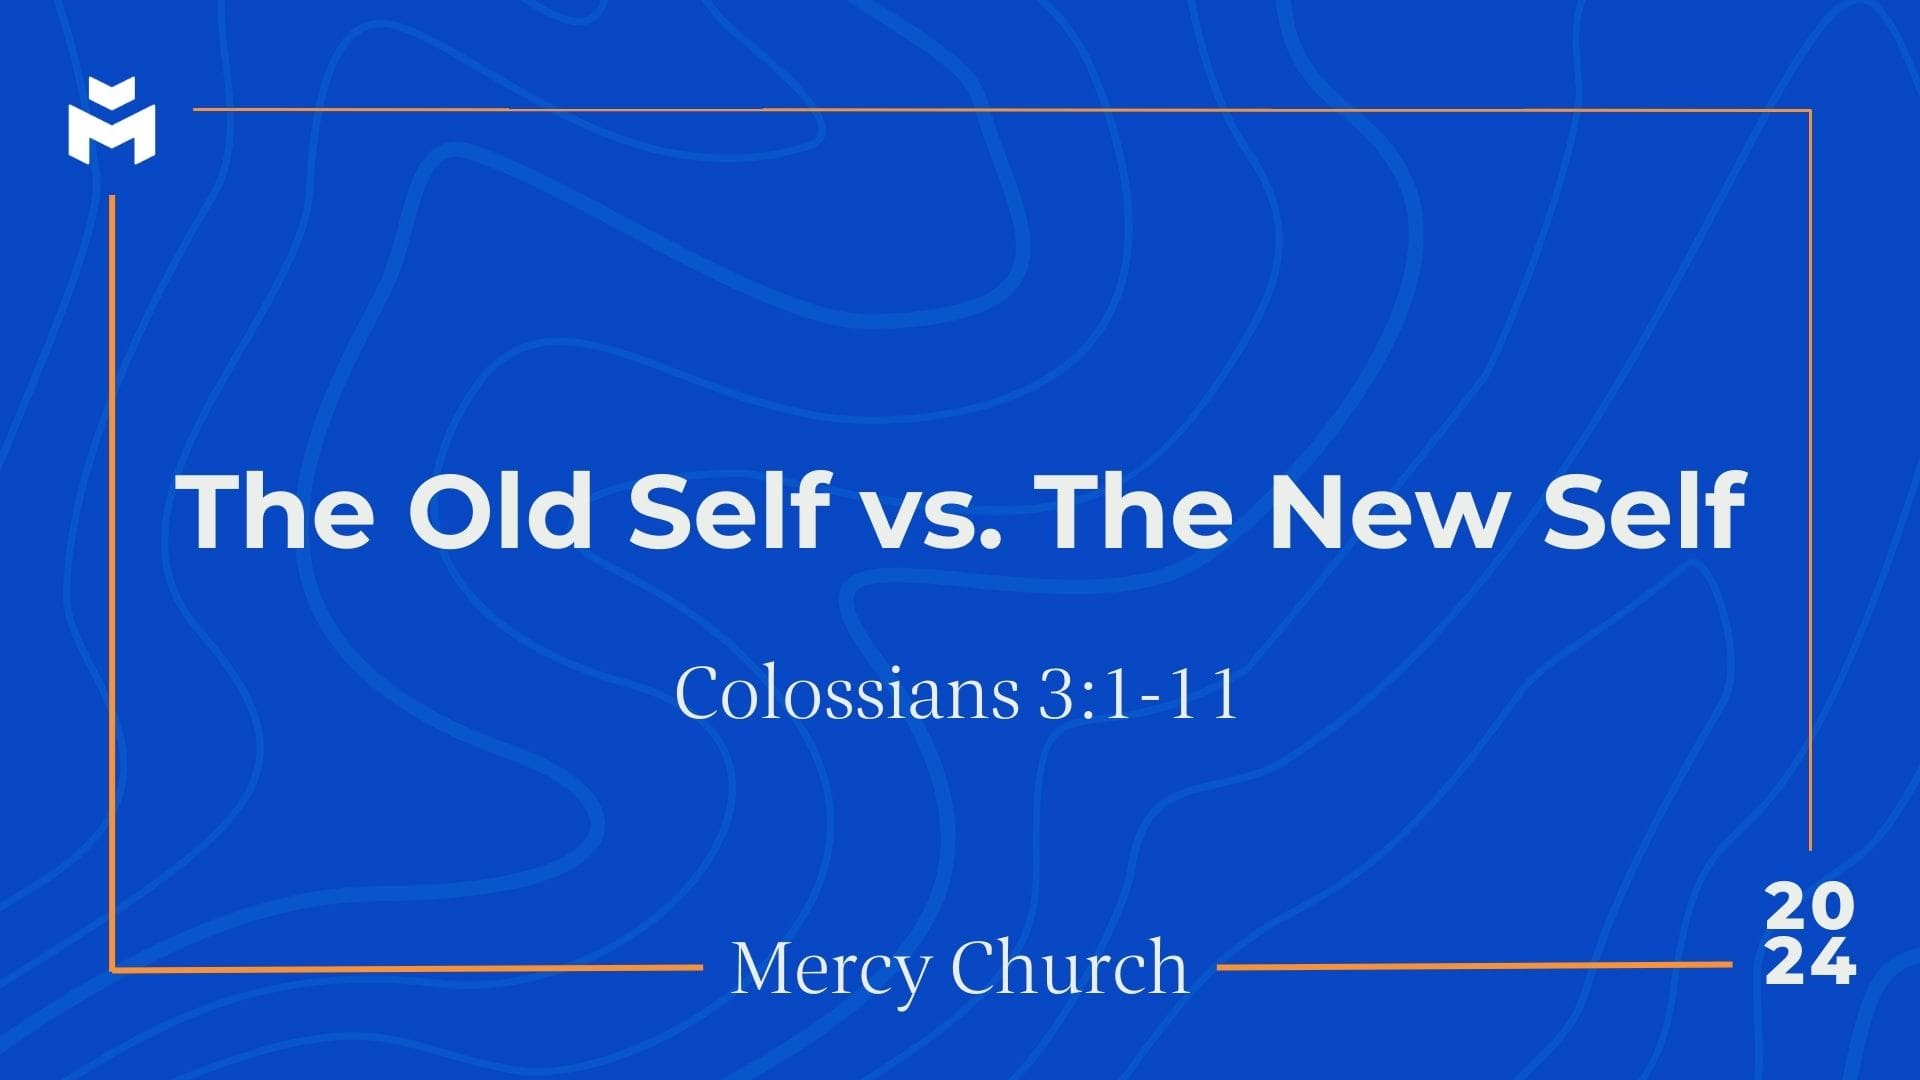 The Old Self vs. The New Self